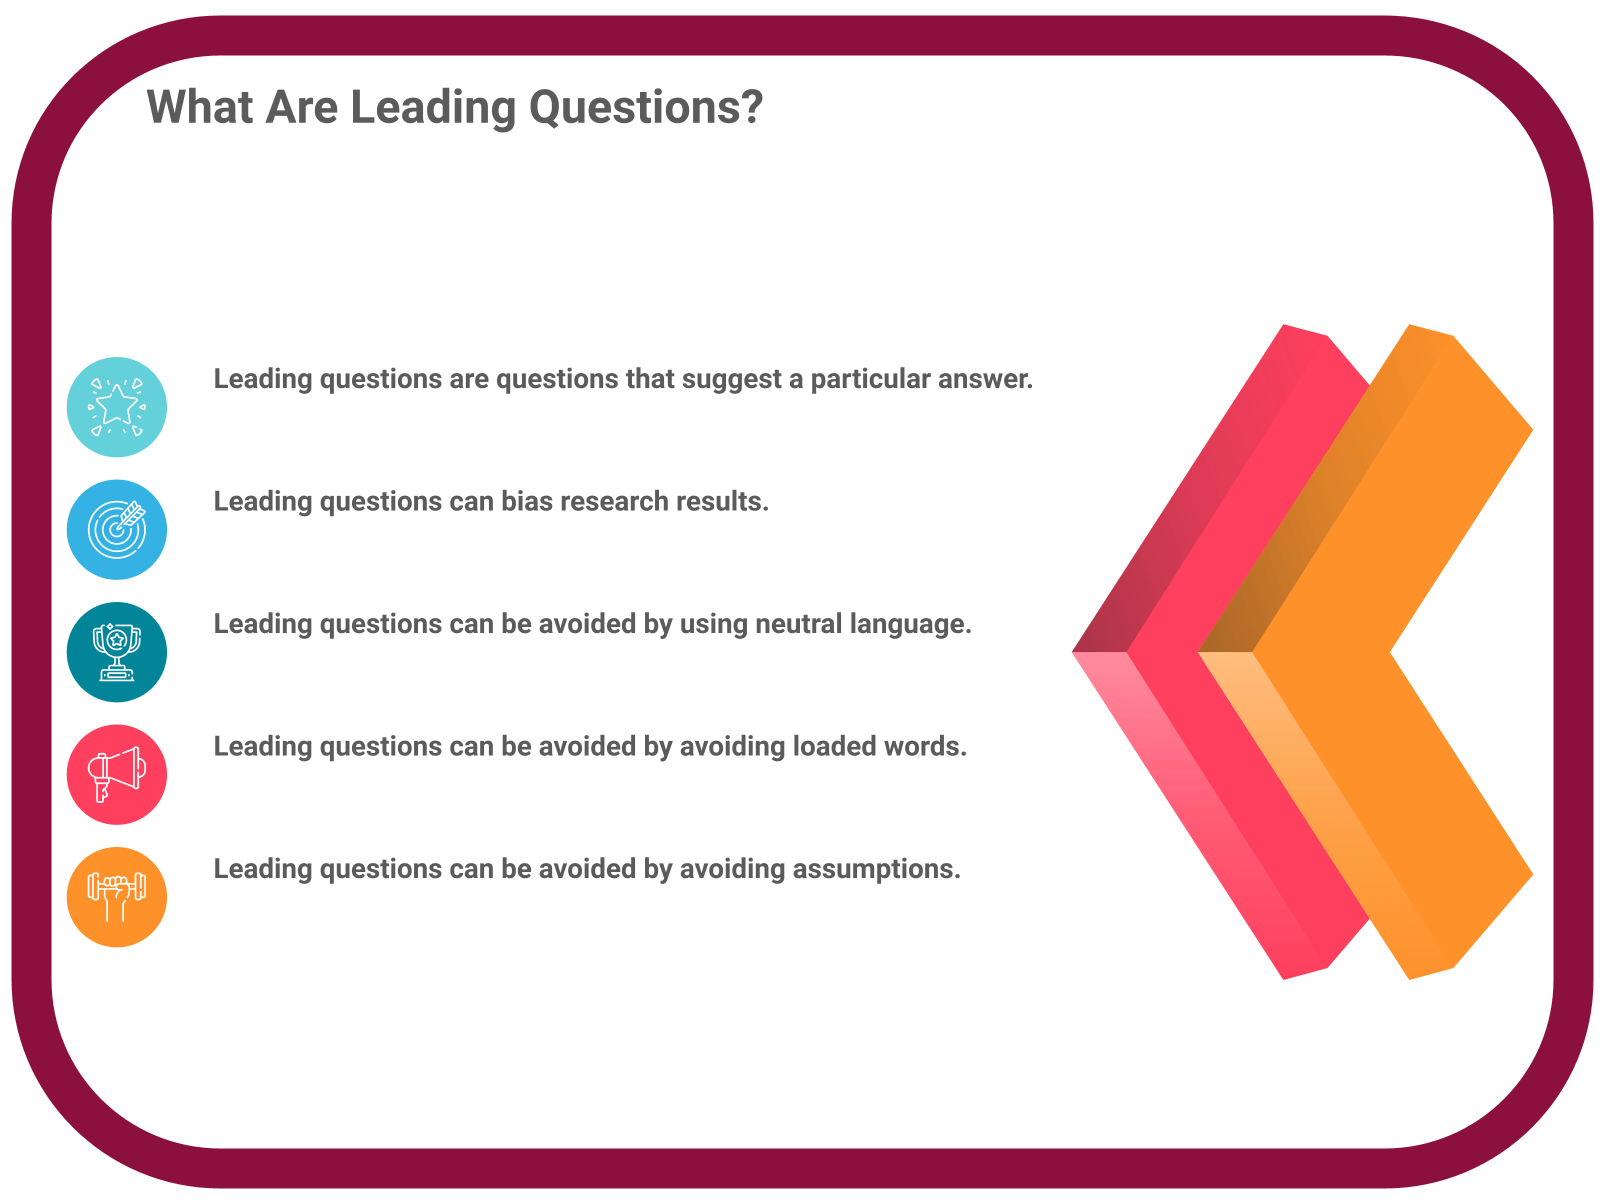 INFOGRAPHIC: What are leading questions? - Poll the People